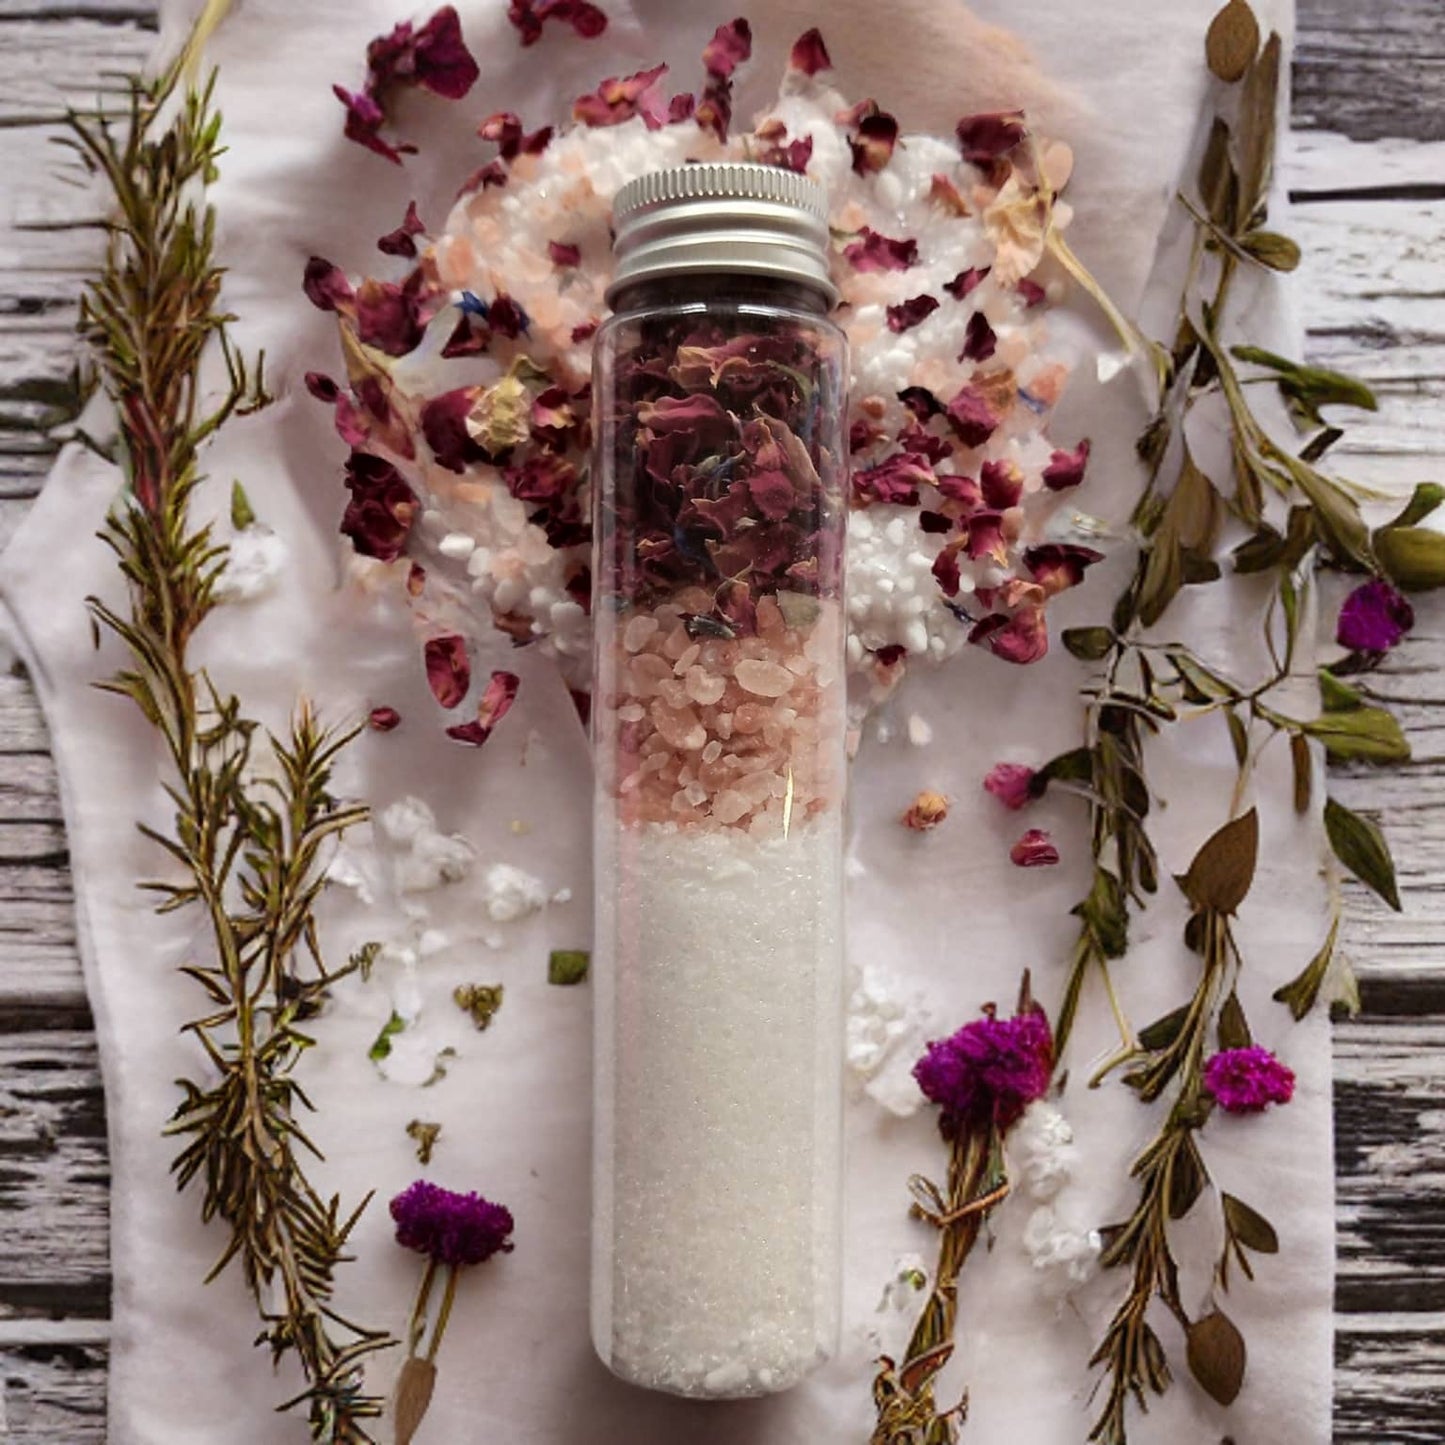 Immerse yourself in luxury with Monks Heath's botanical bath salt tube, inspired by medieval gardens.